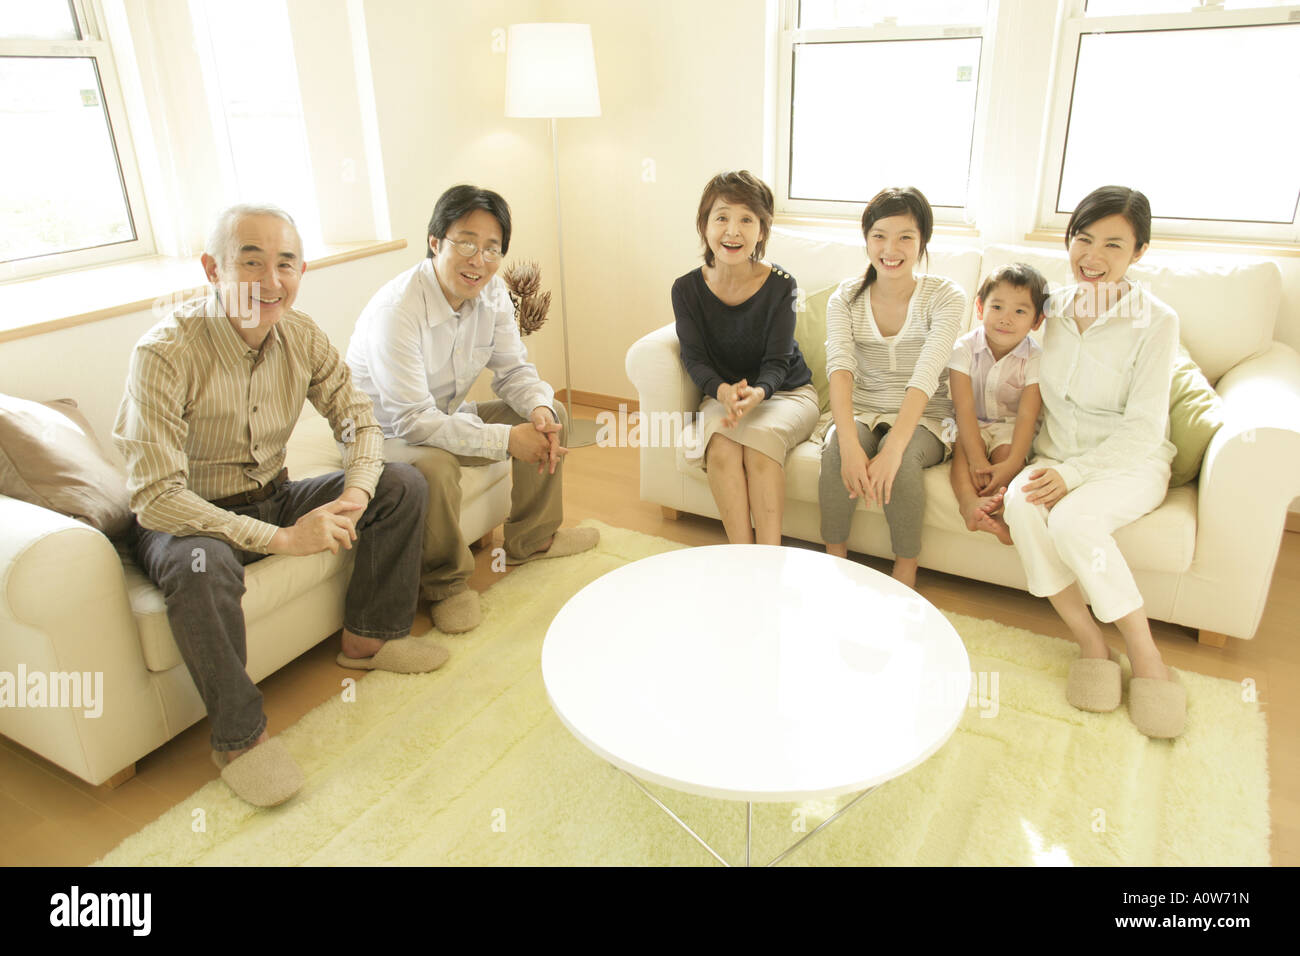 Portrait of a three generation family sitting in a living room and smiling Stock Photo